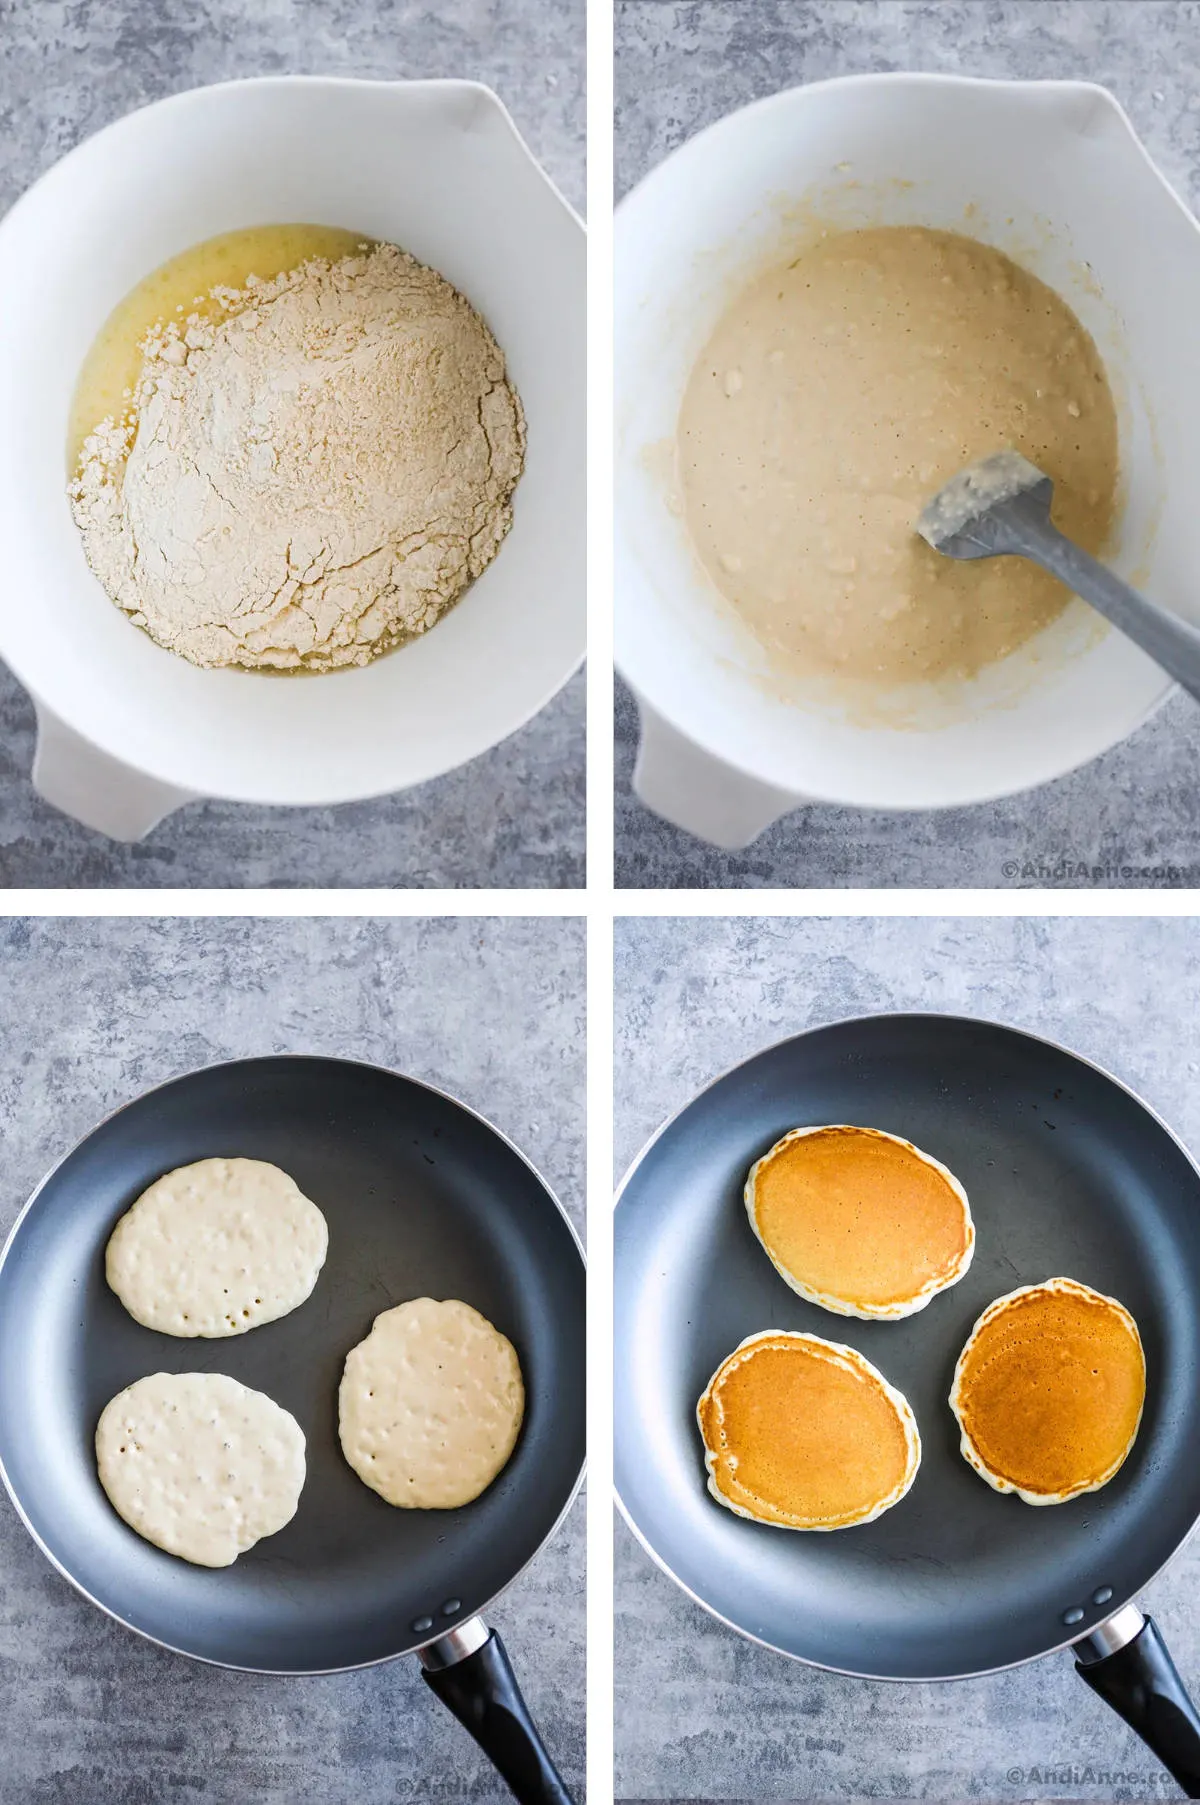 Four images in one: 1. Dry ingredients are added to wet. 2. Ingredients are mixed with a spatula. 3. Three pancakes are in a frying pan, top is not cooked. 4. Pancakes are flipped in frying pan to show cooked side. 